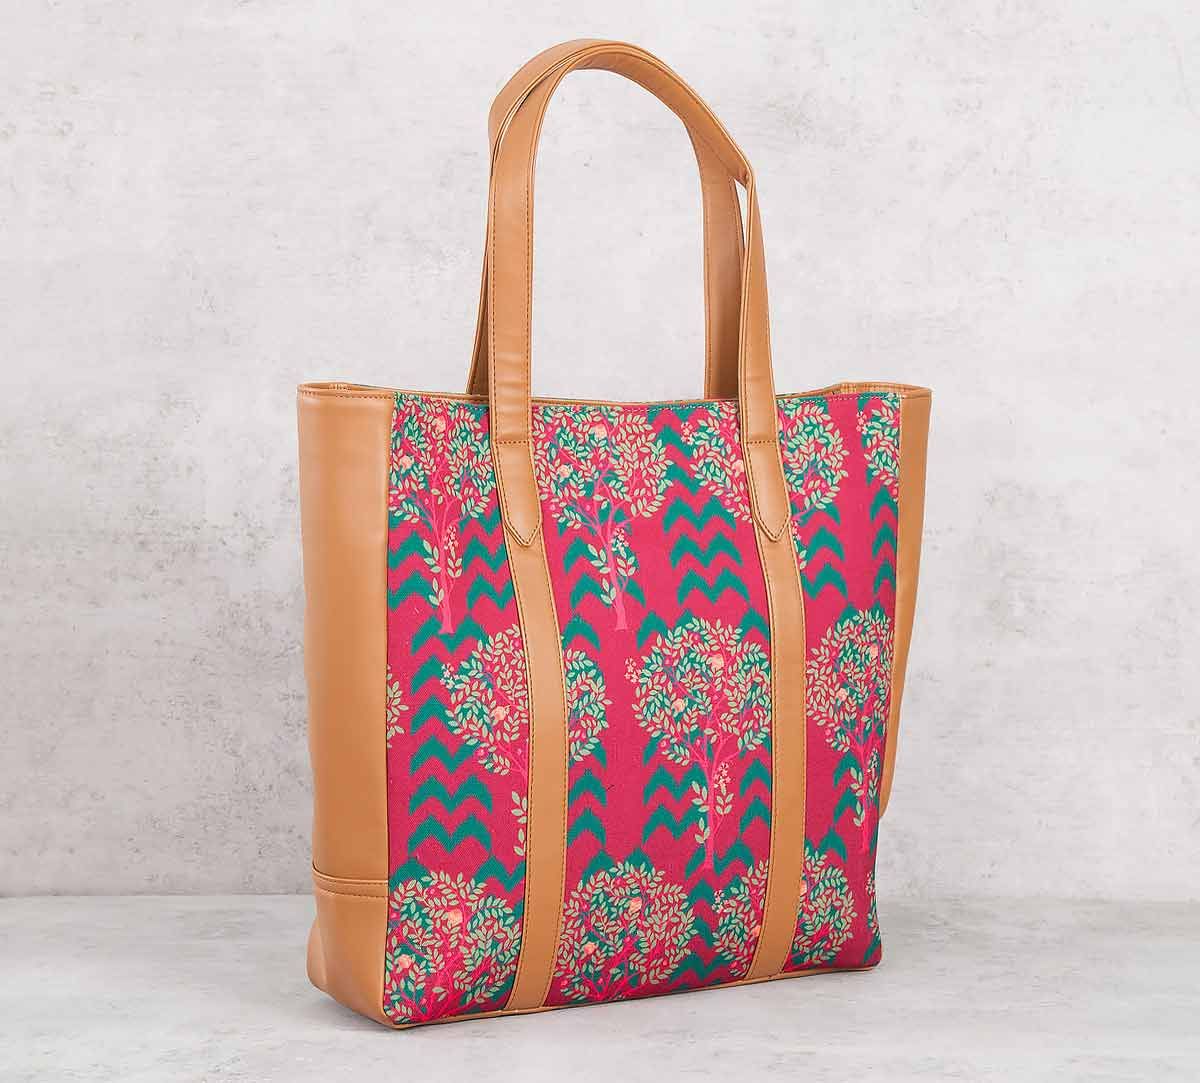 Shop Trending Designs in Leather Tote Bags